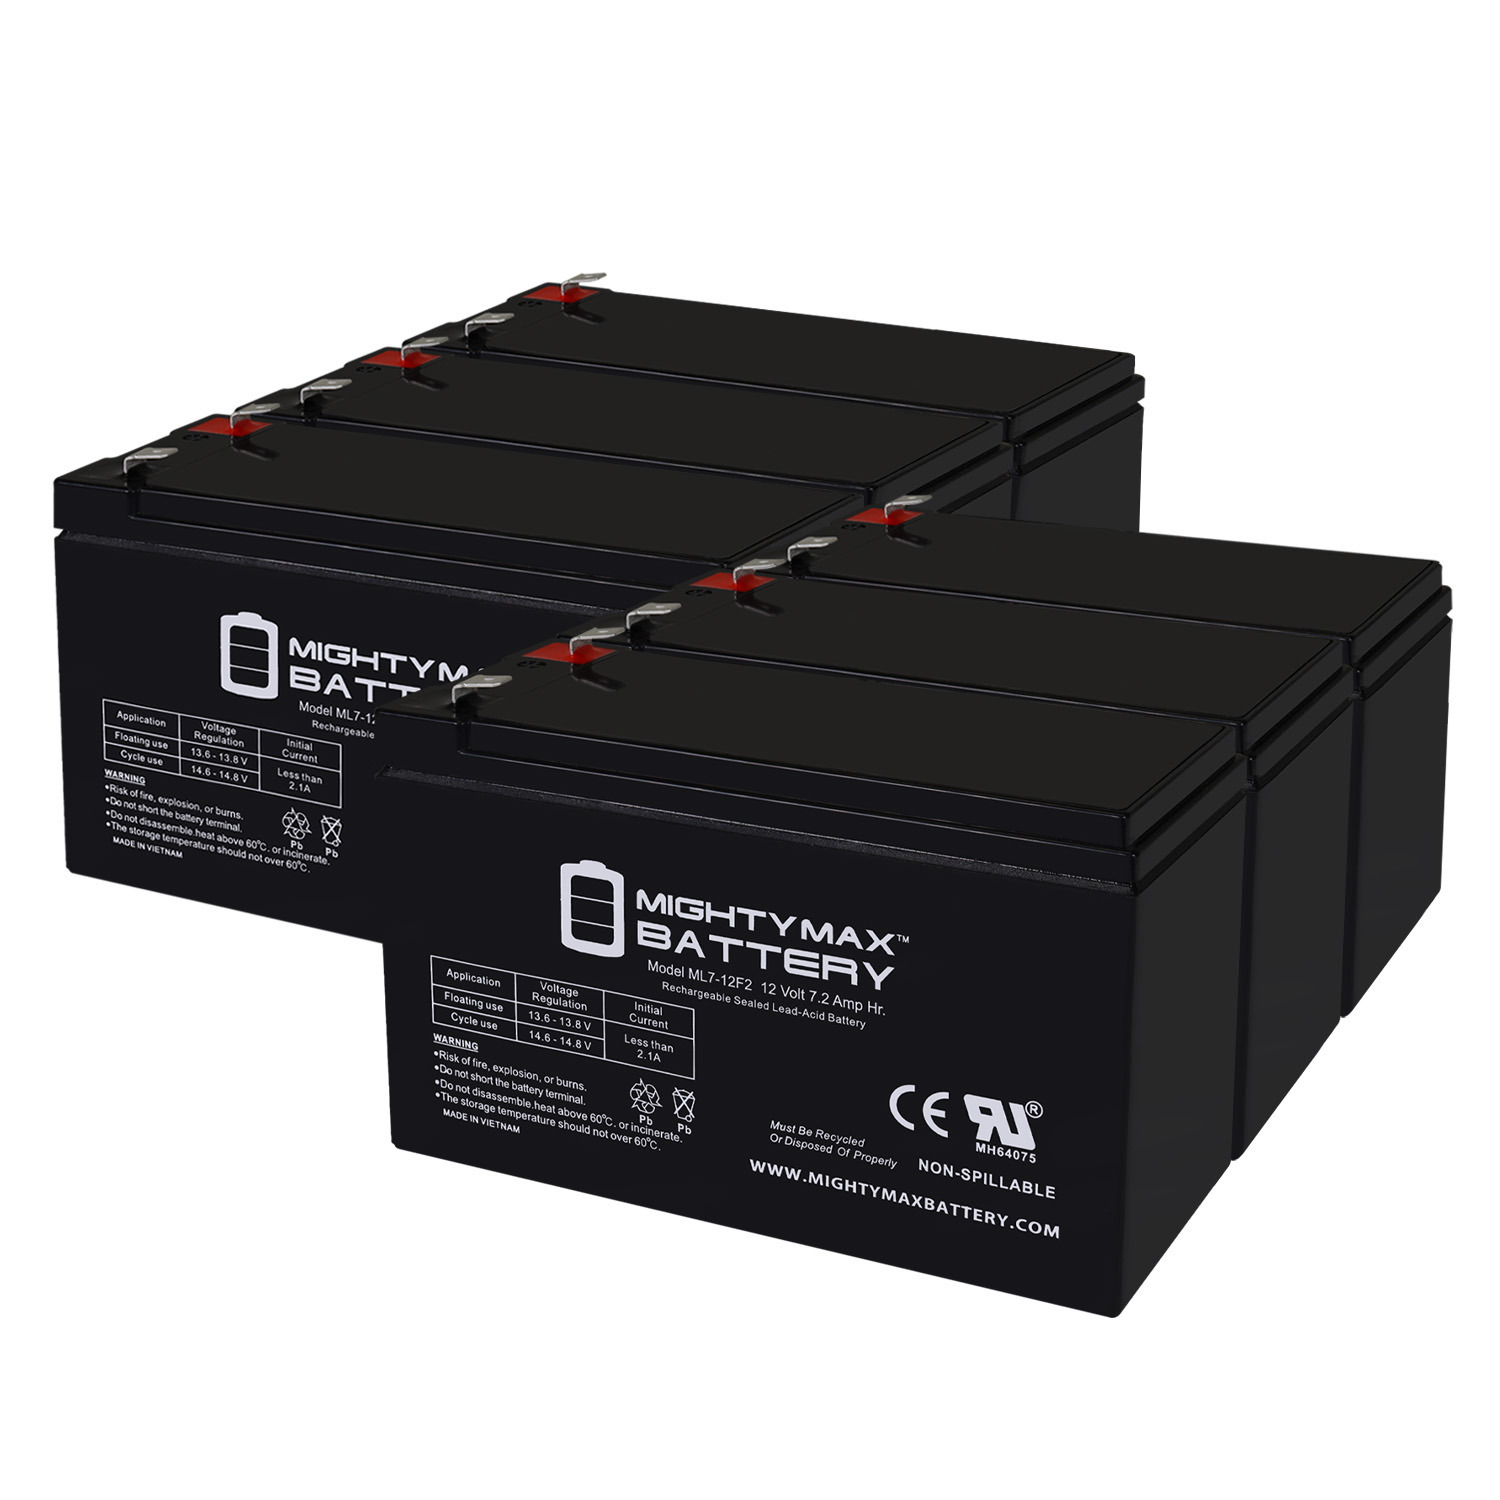 12V 7Ah F2 Replacement Battery for APC UPS SMT750US - 6 Pack